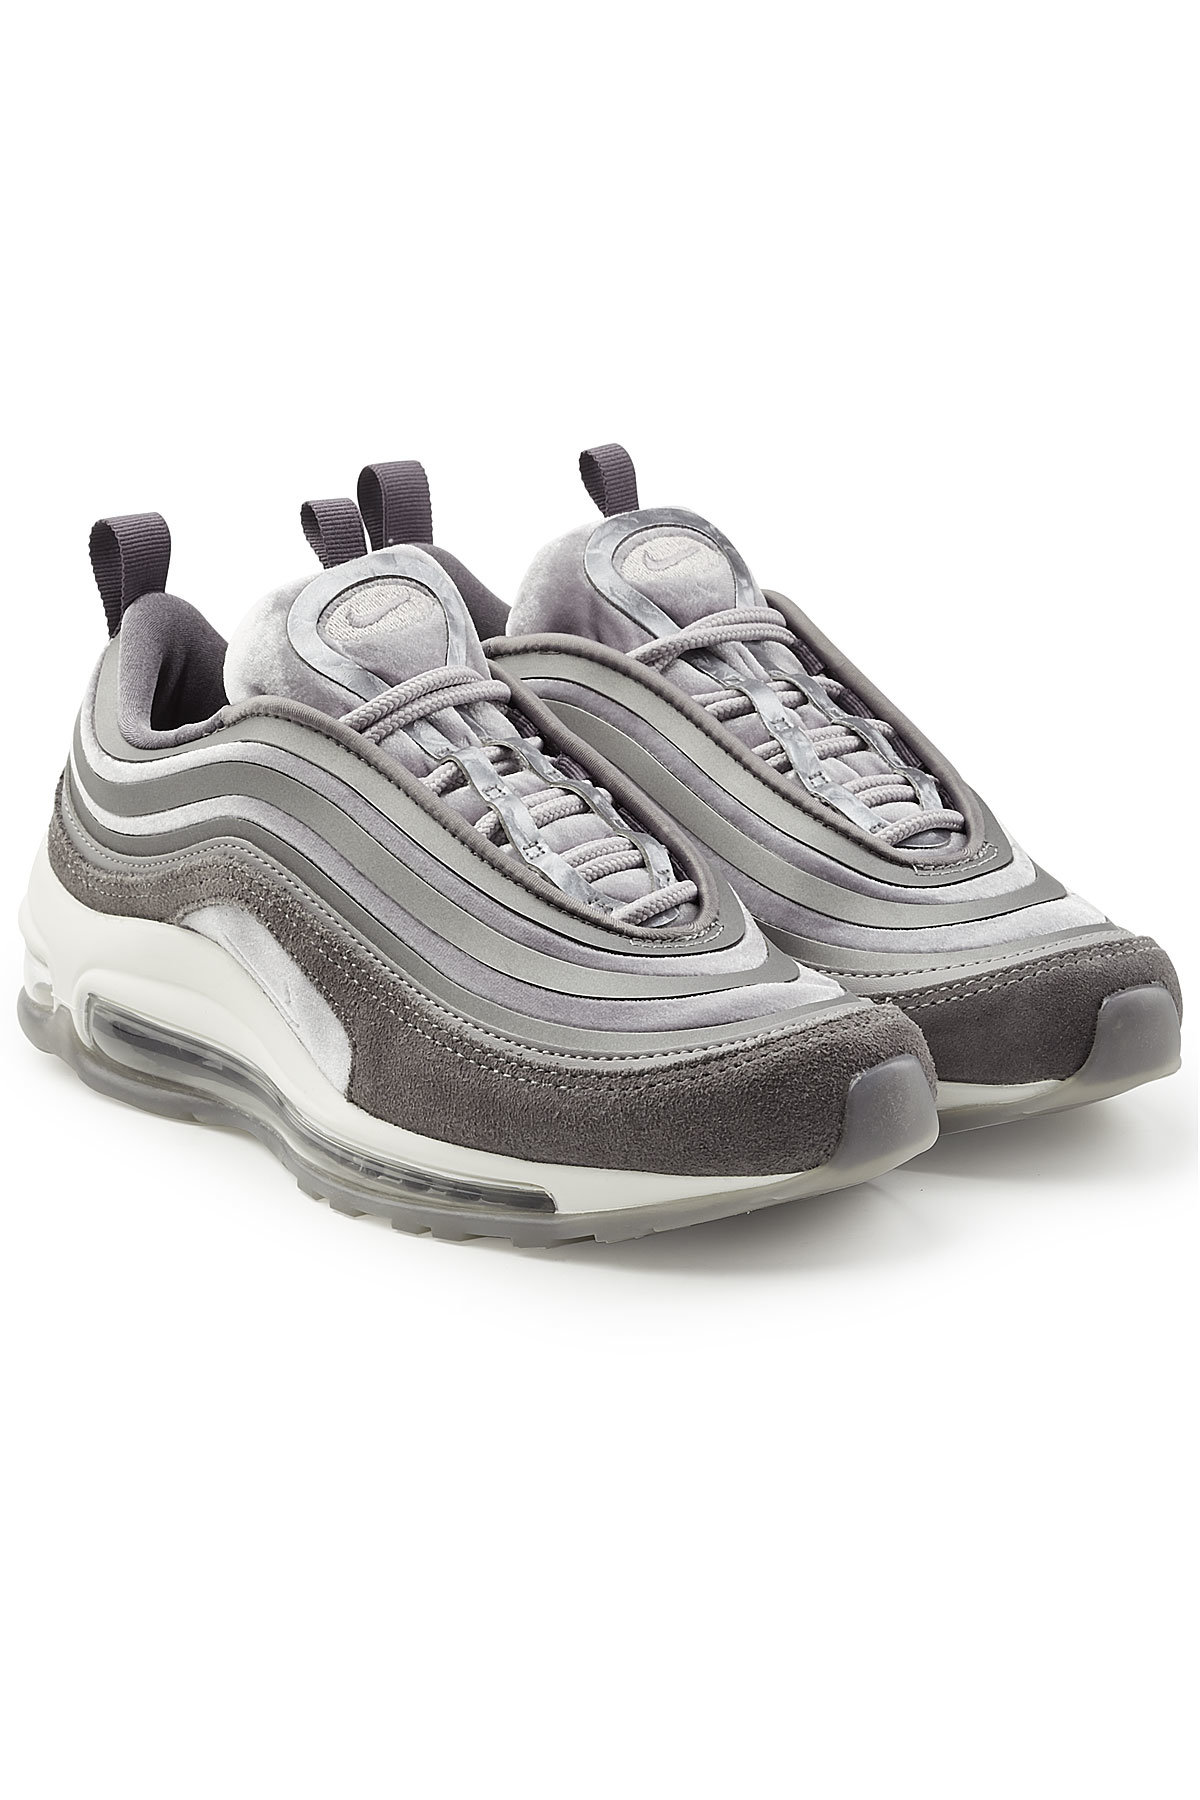 Nike - Air Max 97 Ultra '17 Sneakers with Suede